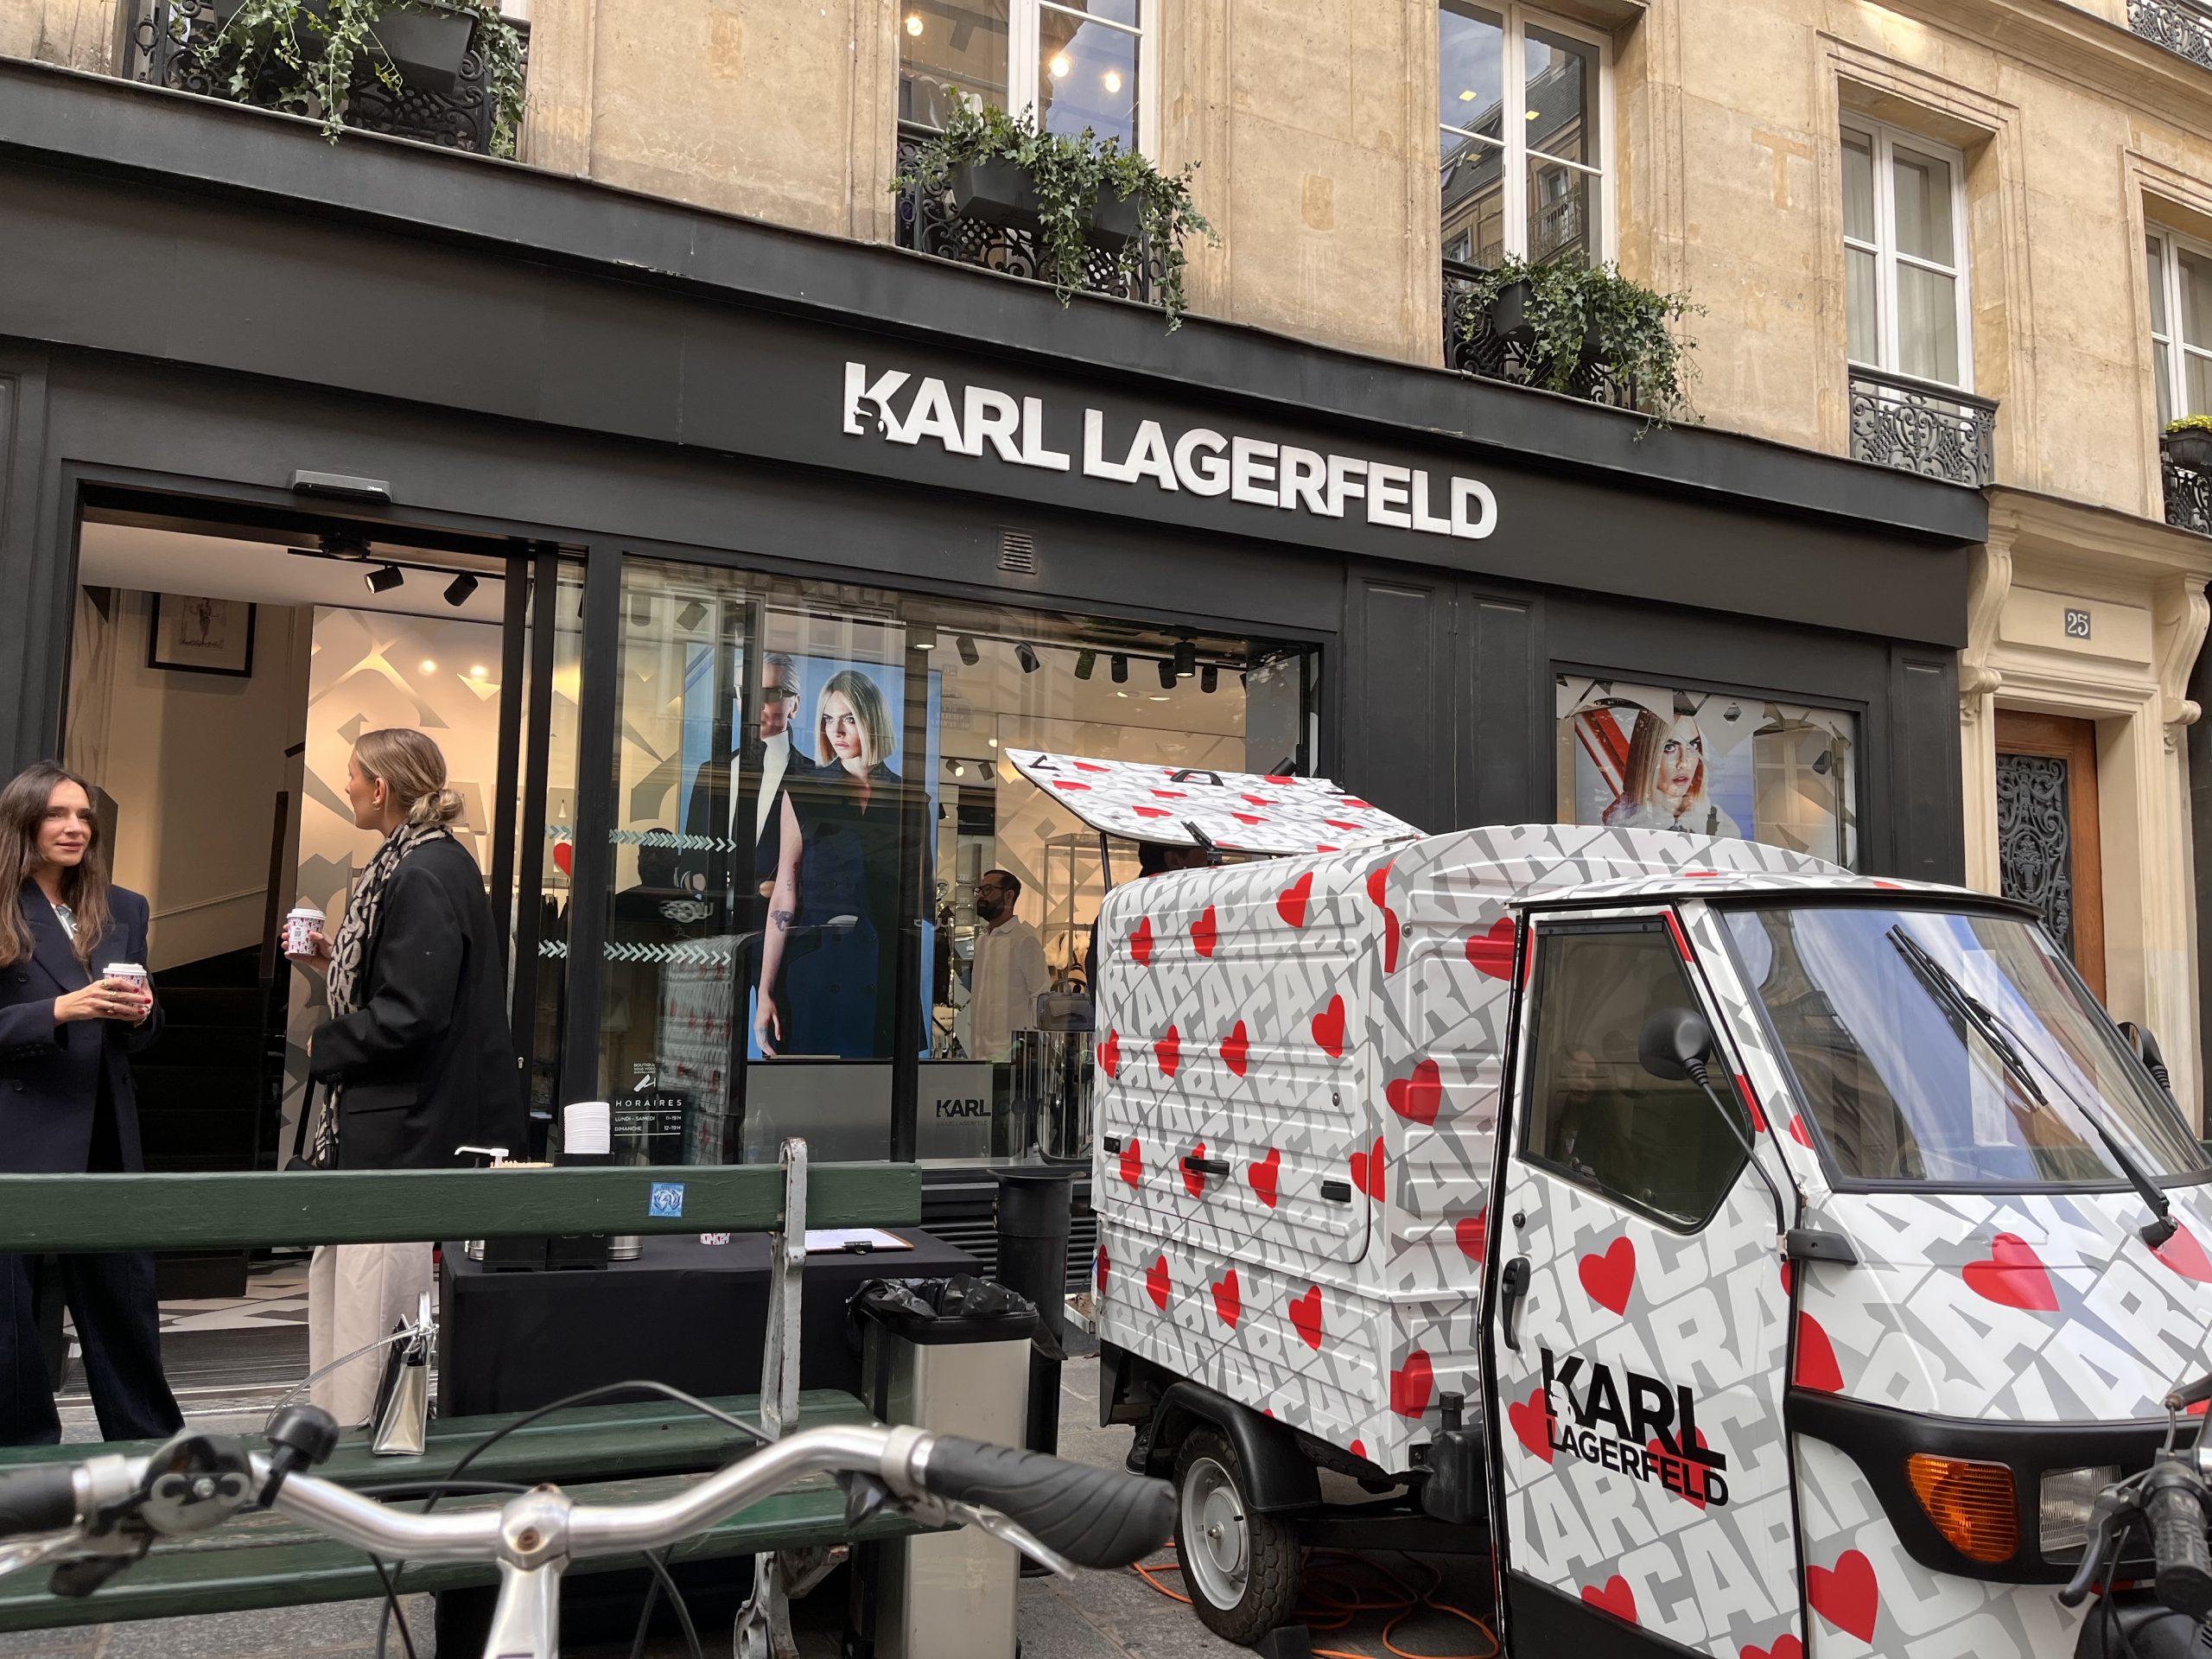 The Mobile Coffee Bean Cara loves Karl Lagerfeld branded coffee bar outside store